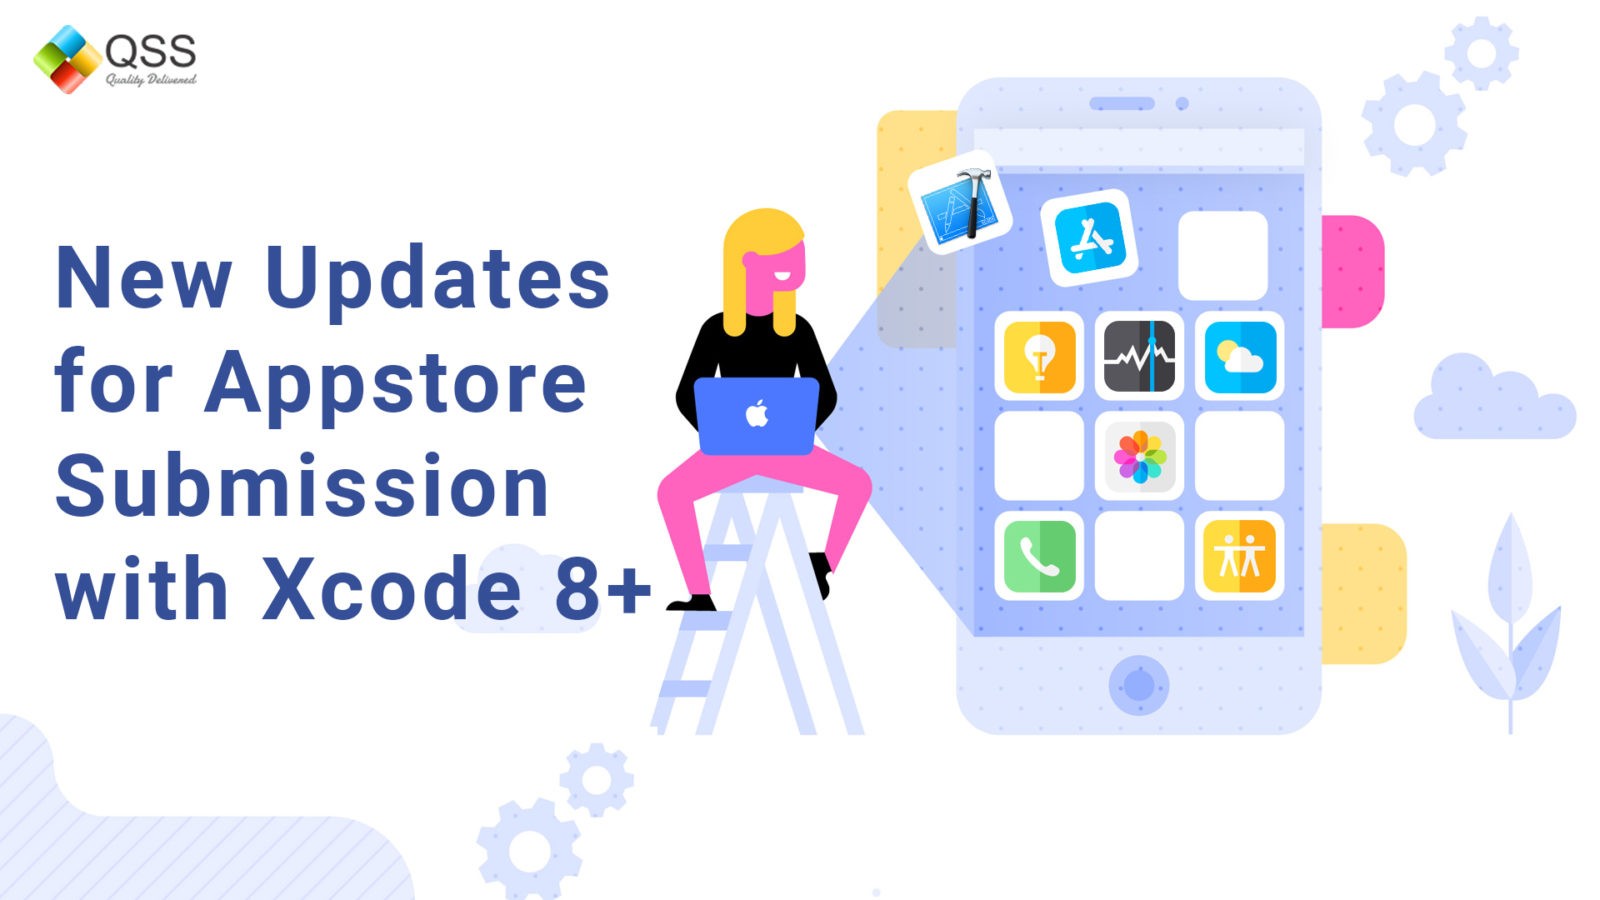 New Updates for App Store Submission with Xcode 8+